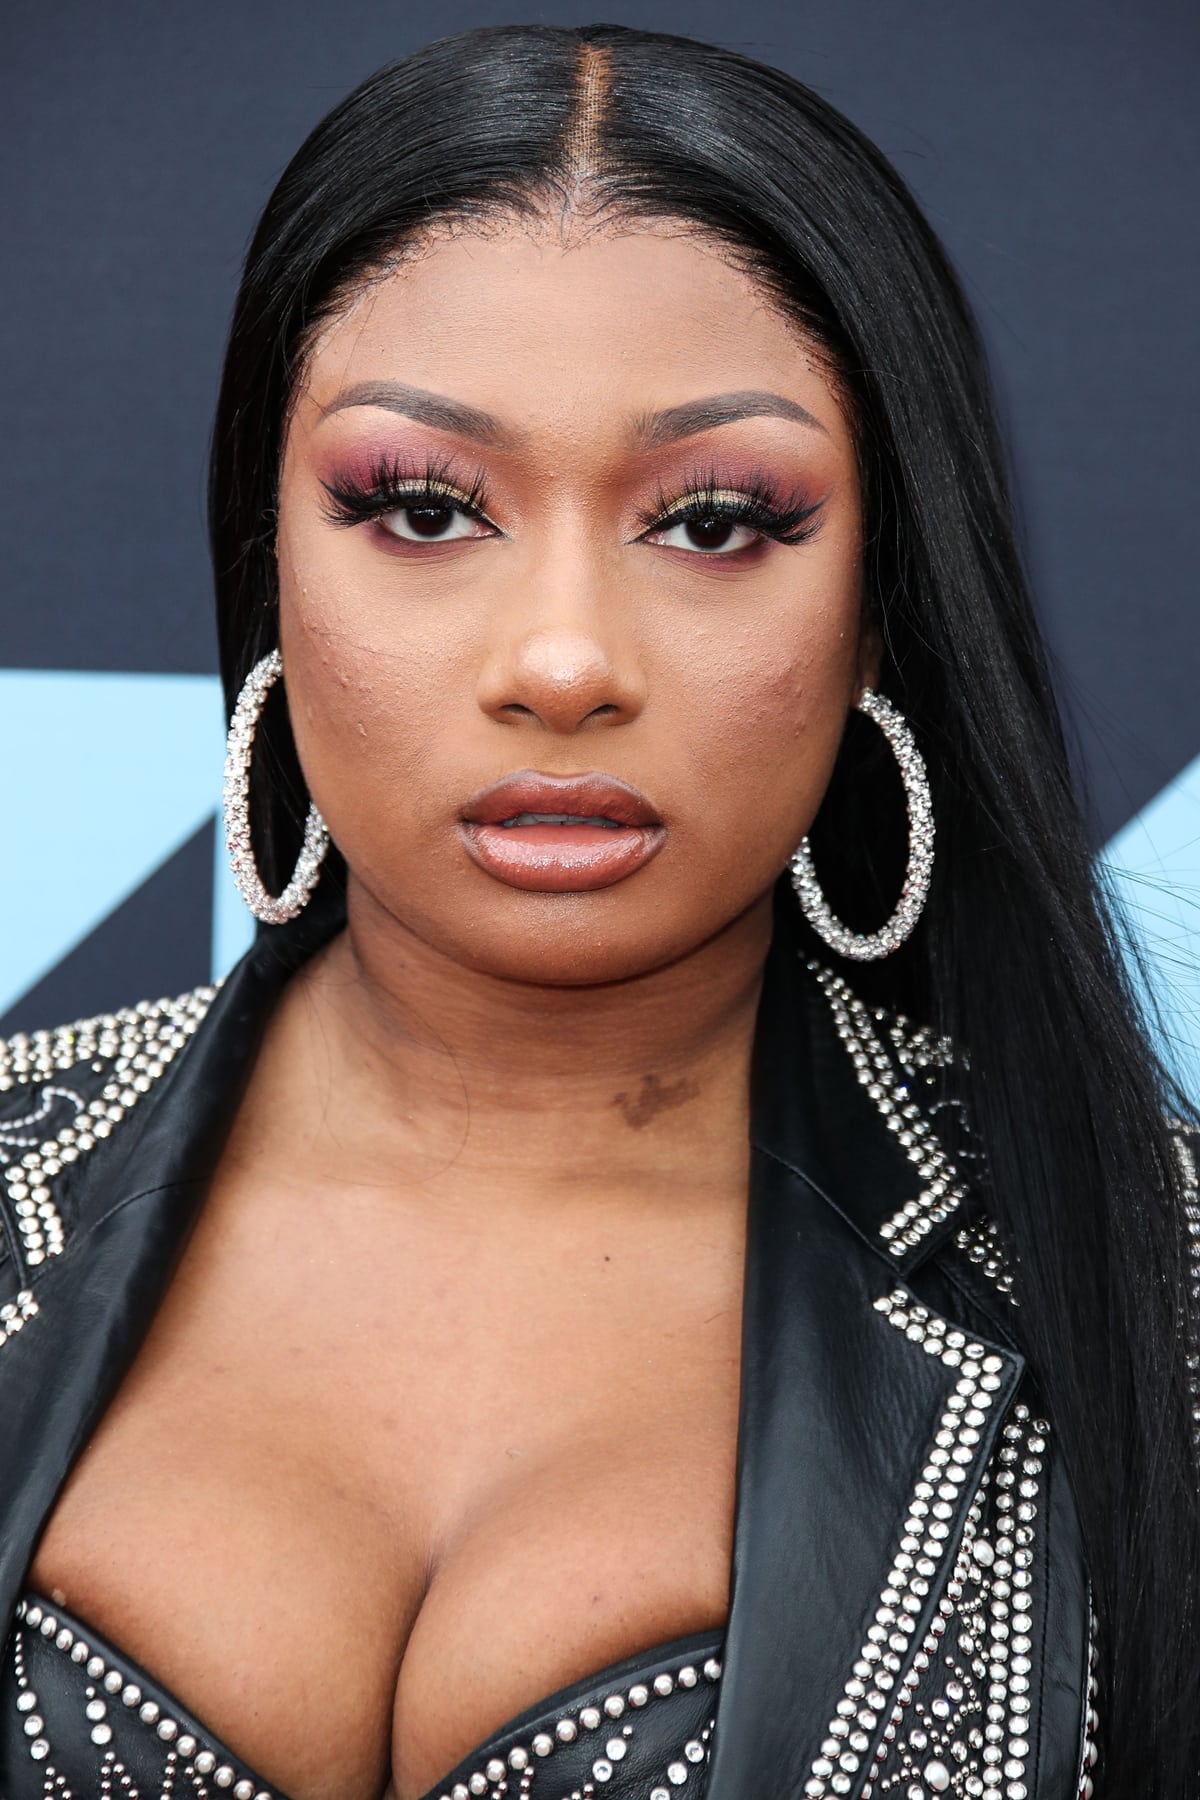 Megan Thee Stallion has not commented on the rumors that she is transgender